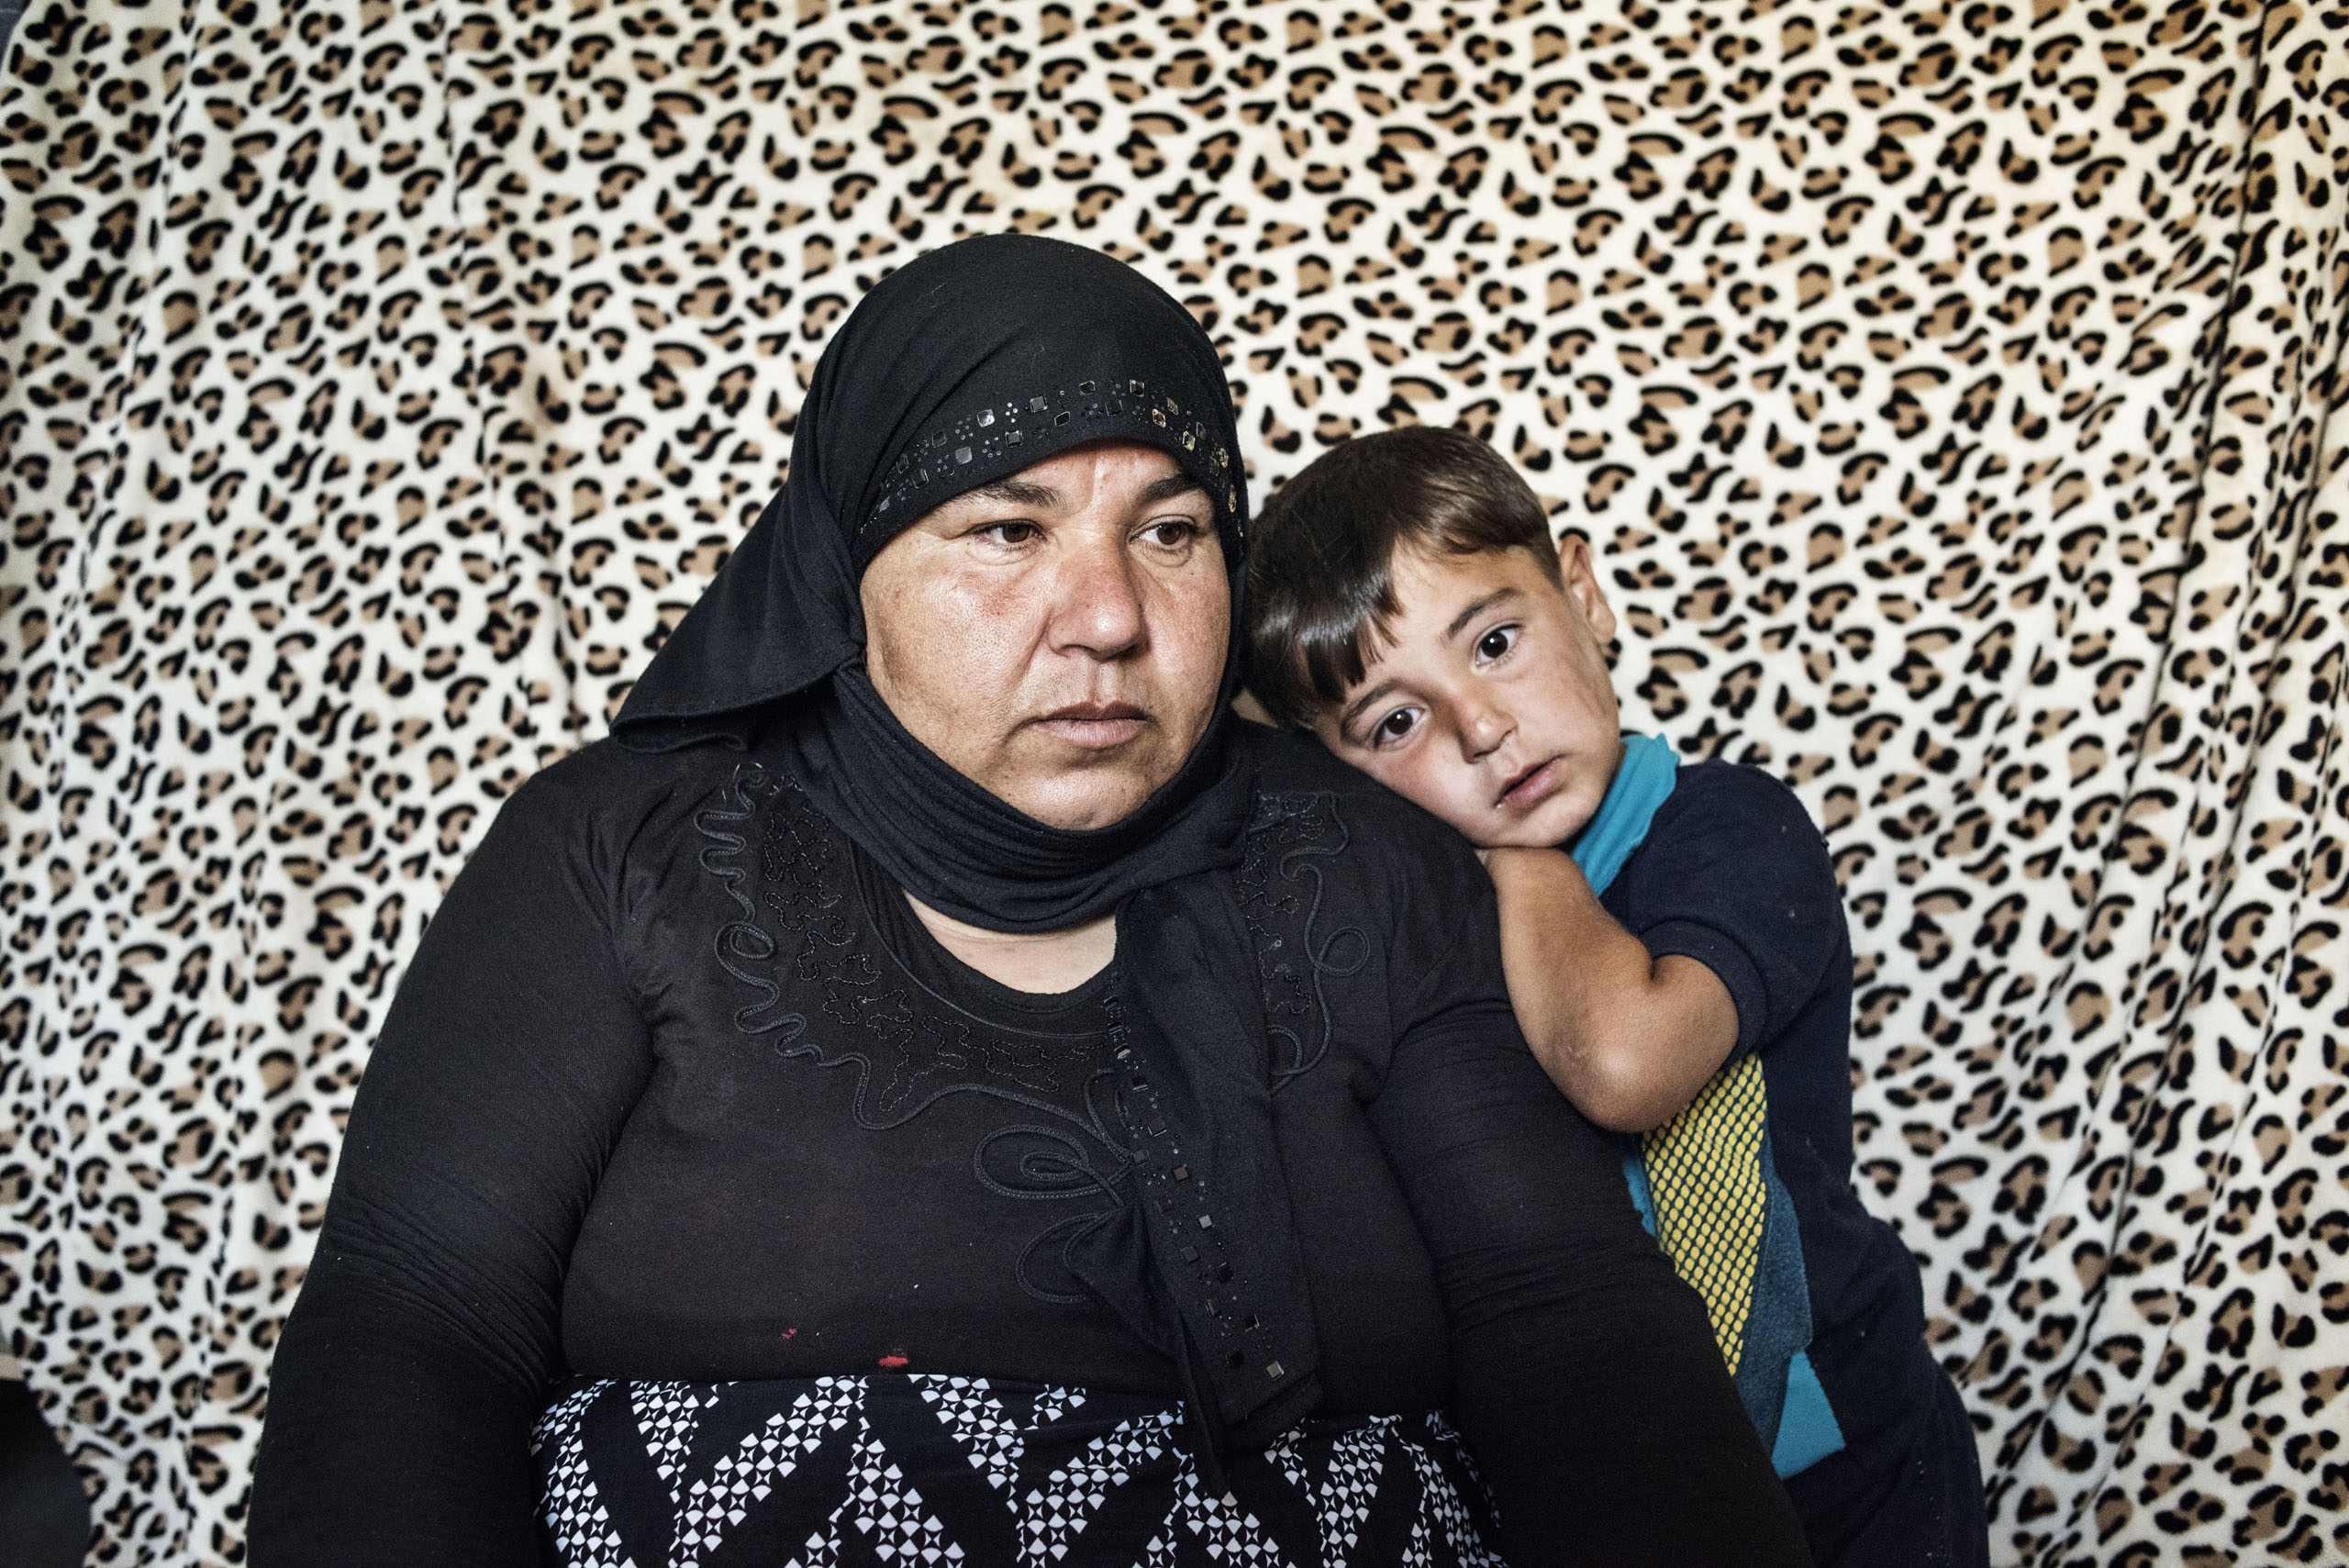 Nasima Abdo, 35, a member of the Yazidi religious minority, appears in a camp for displaced people outside the city of Dohuk, in Iraq's autonomous Kurdish region, May 19, 2016. Abdo and three of her children were taken captive by ISIS fighters in August 2014. After months in captivity, she escaped, while two of her children remain in ISIS' hands.